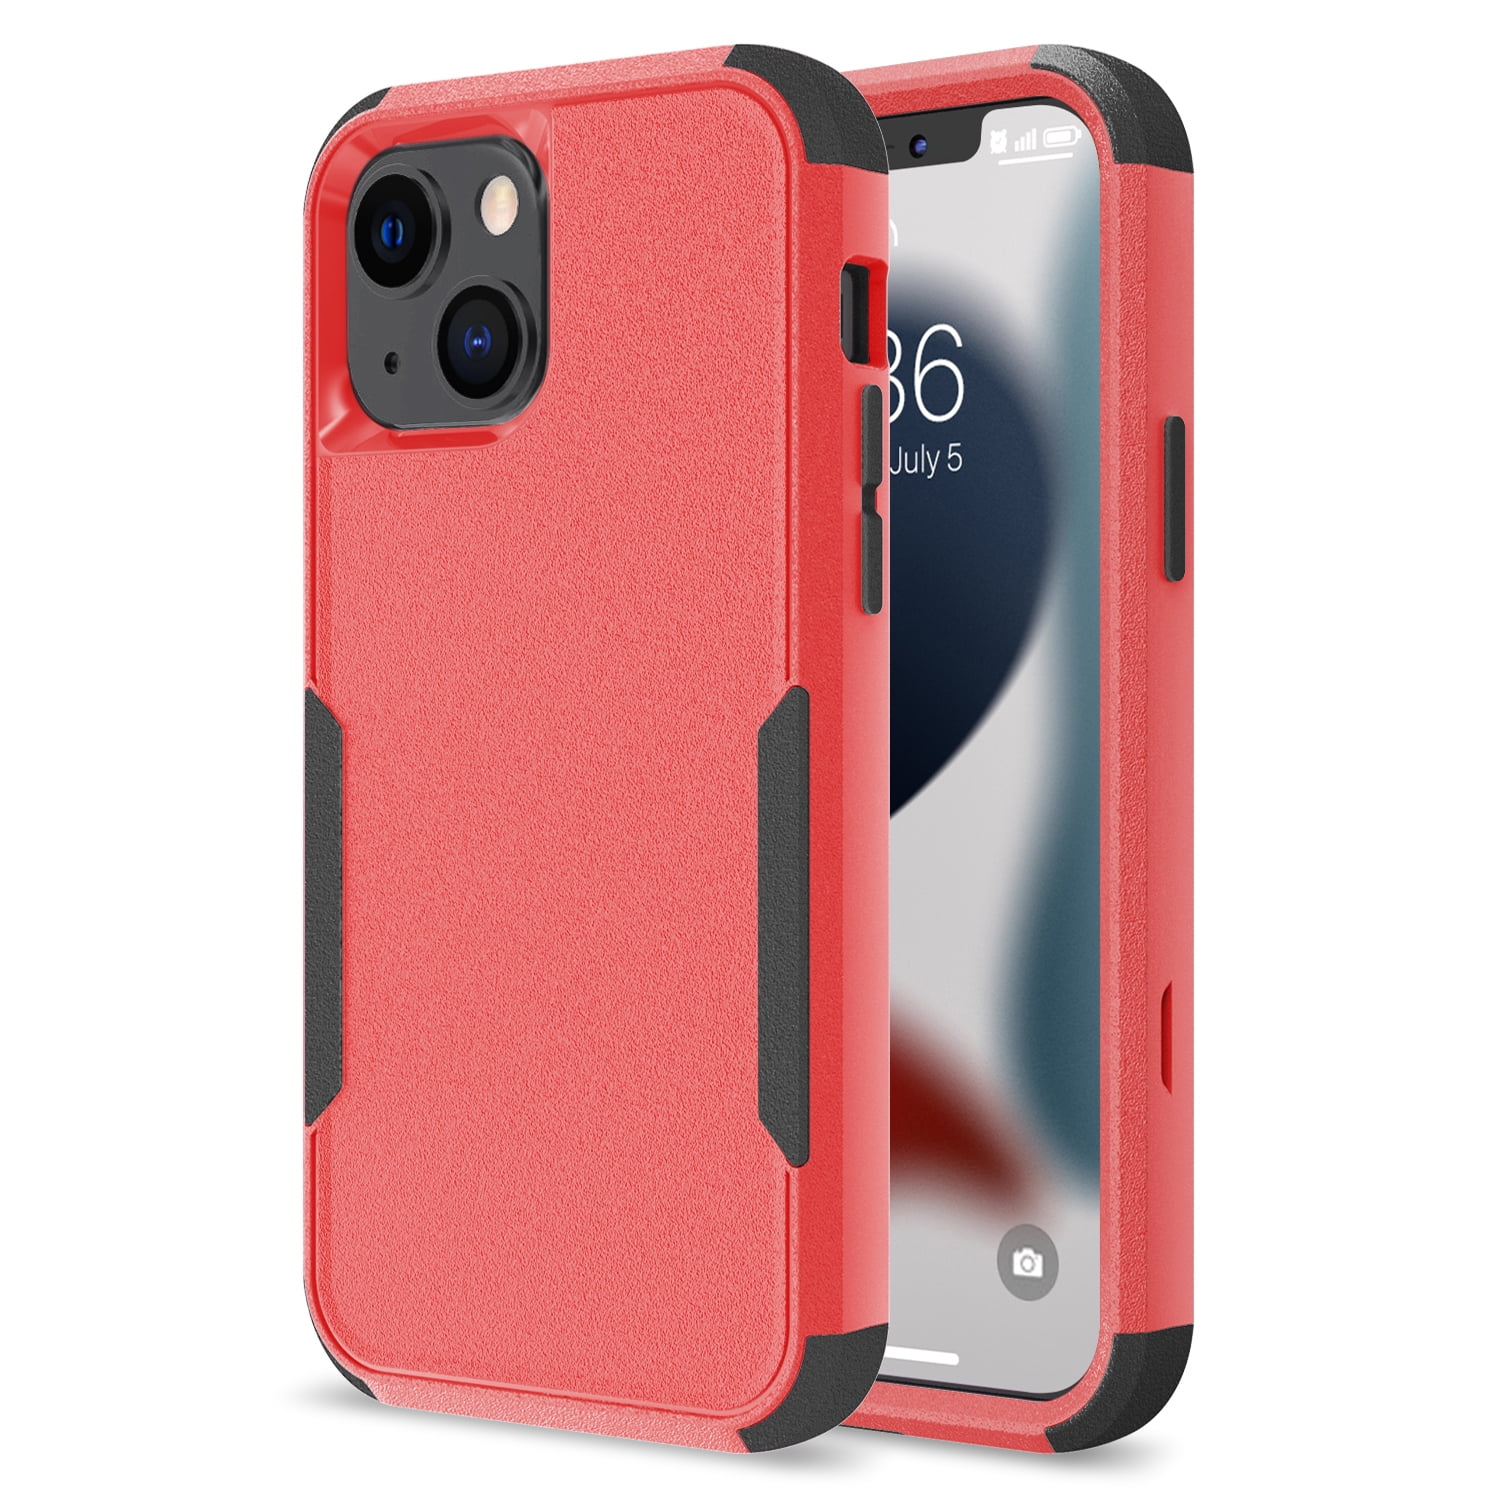 iPhone 6/6S Back Cover and Case Blood Red Design – mizzleti